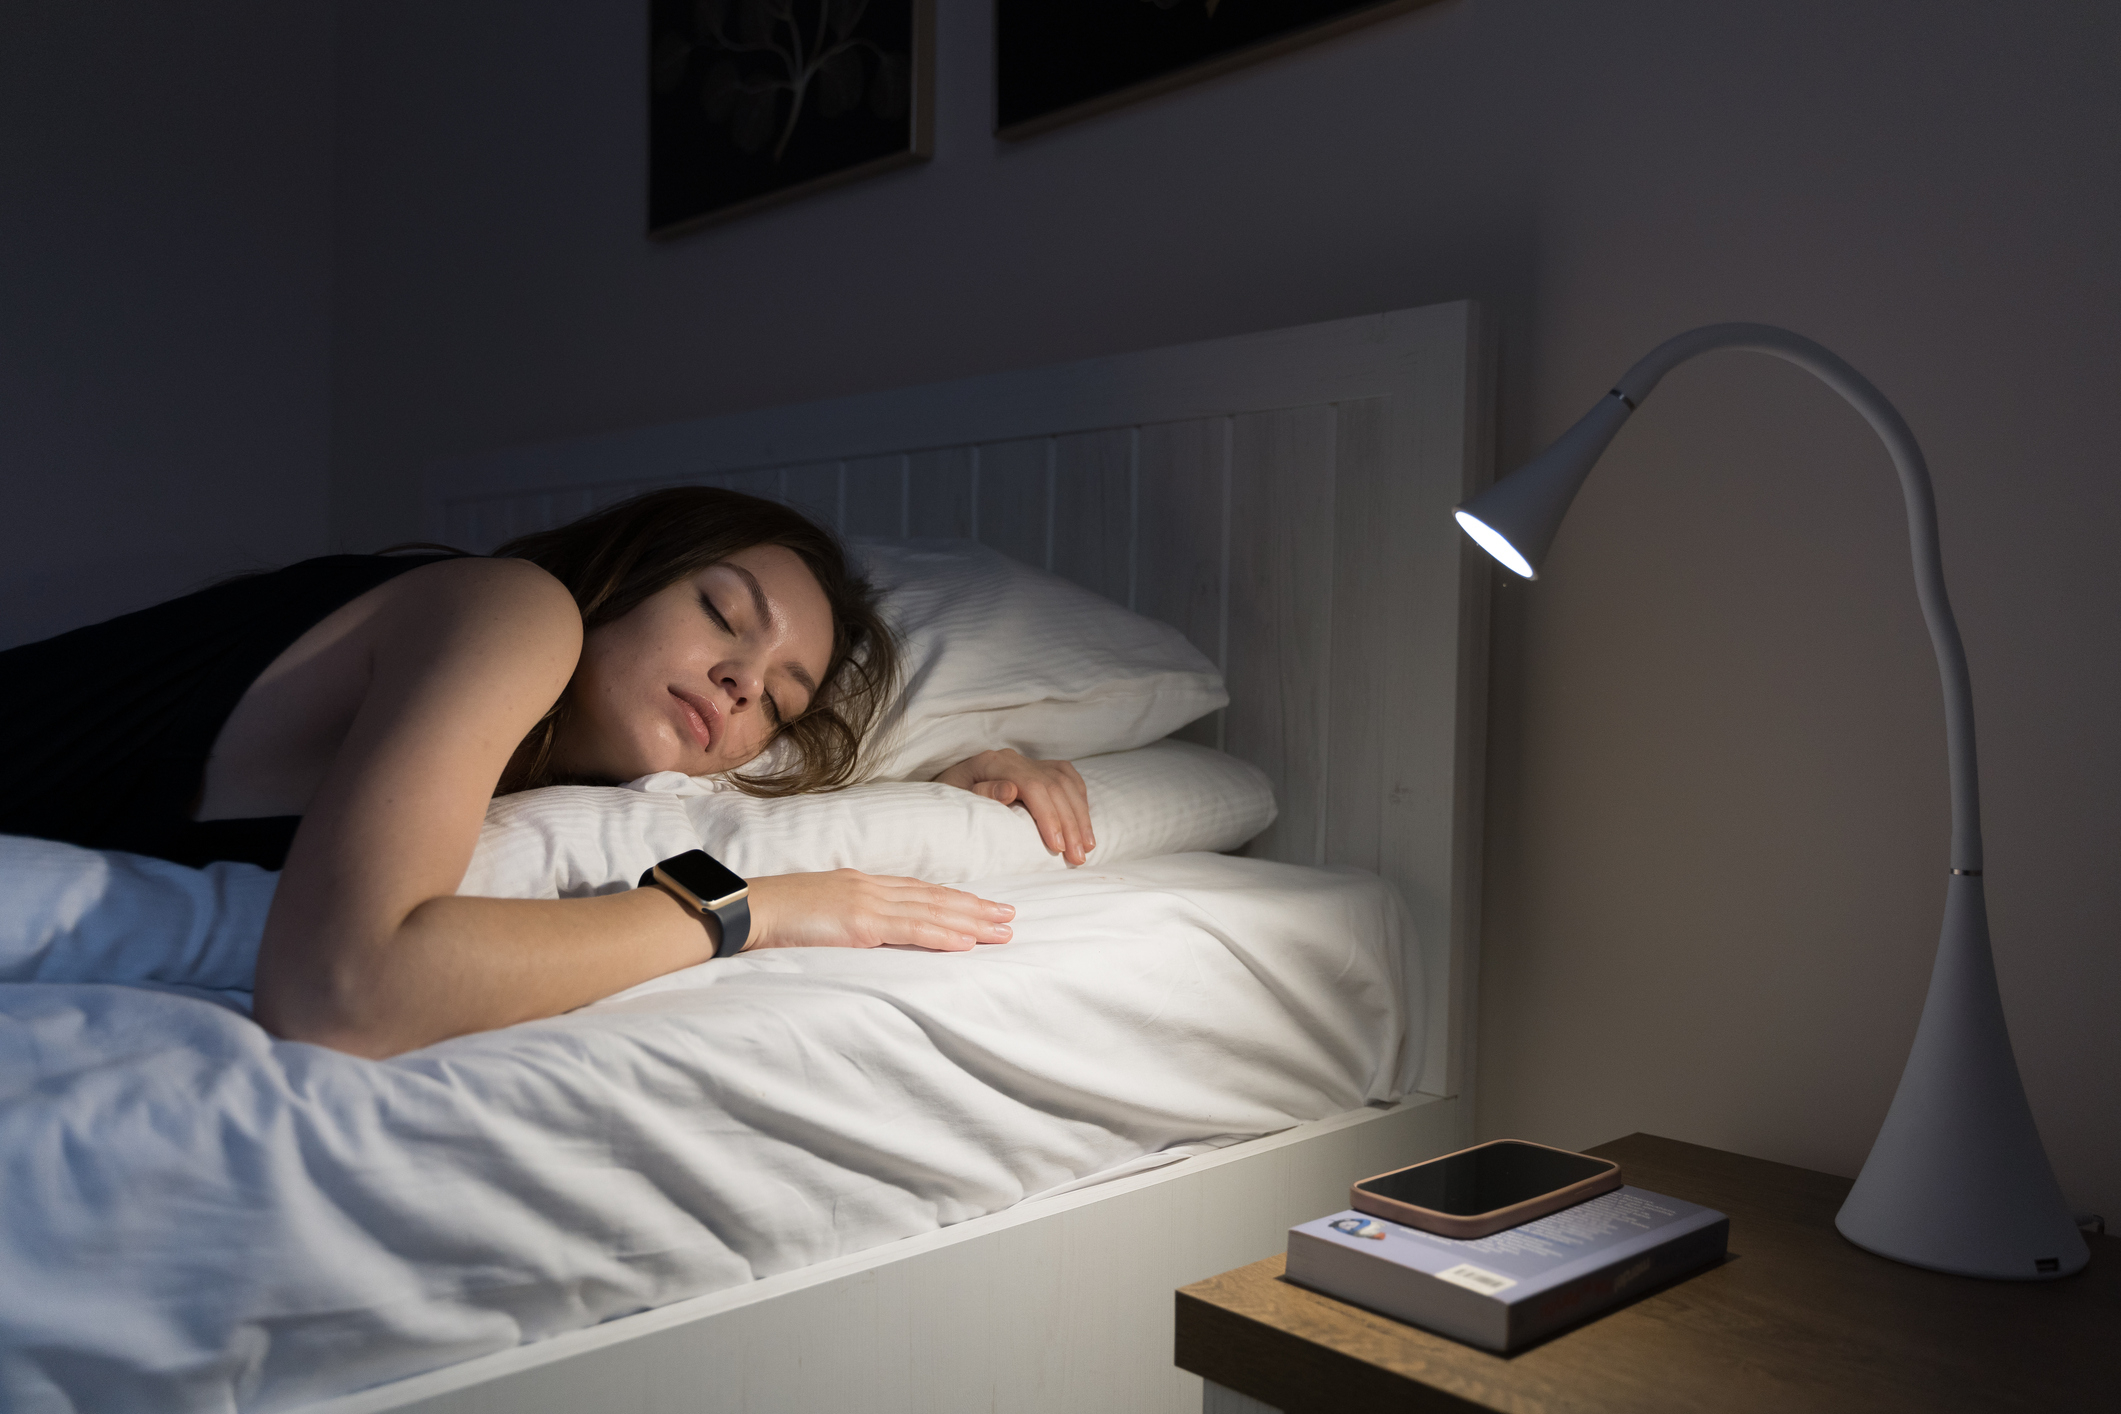 Woman sleeping in bed with a book and illuminated bedside lamp